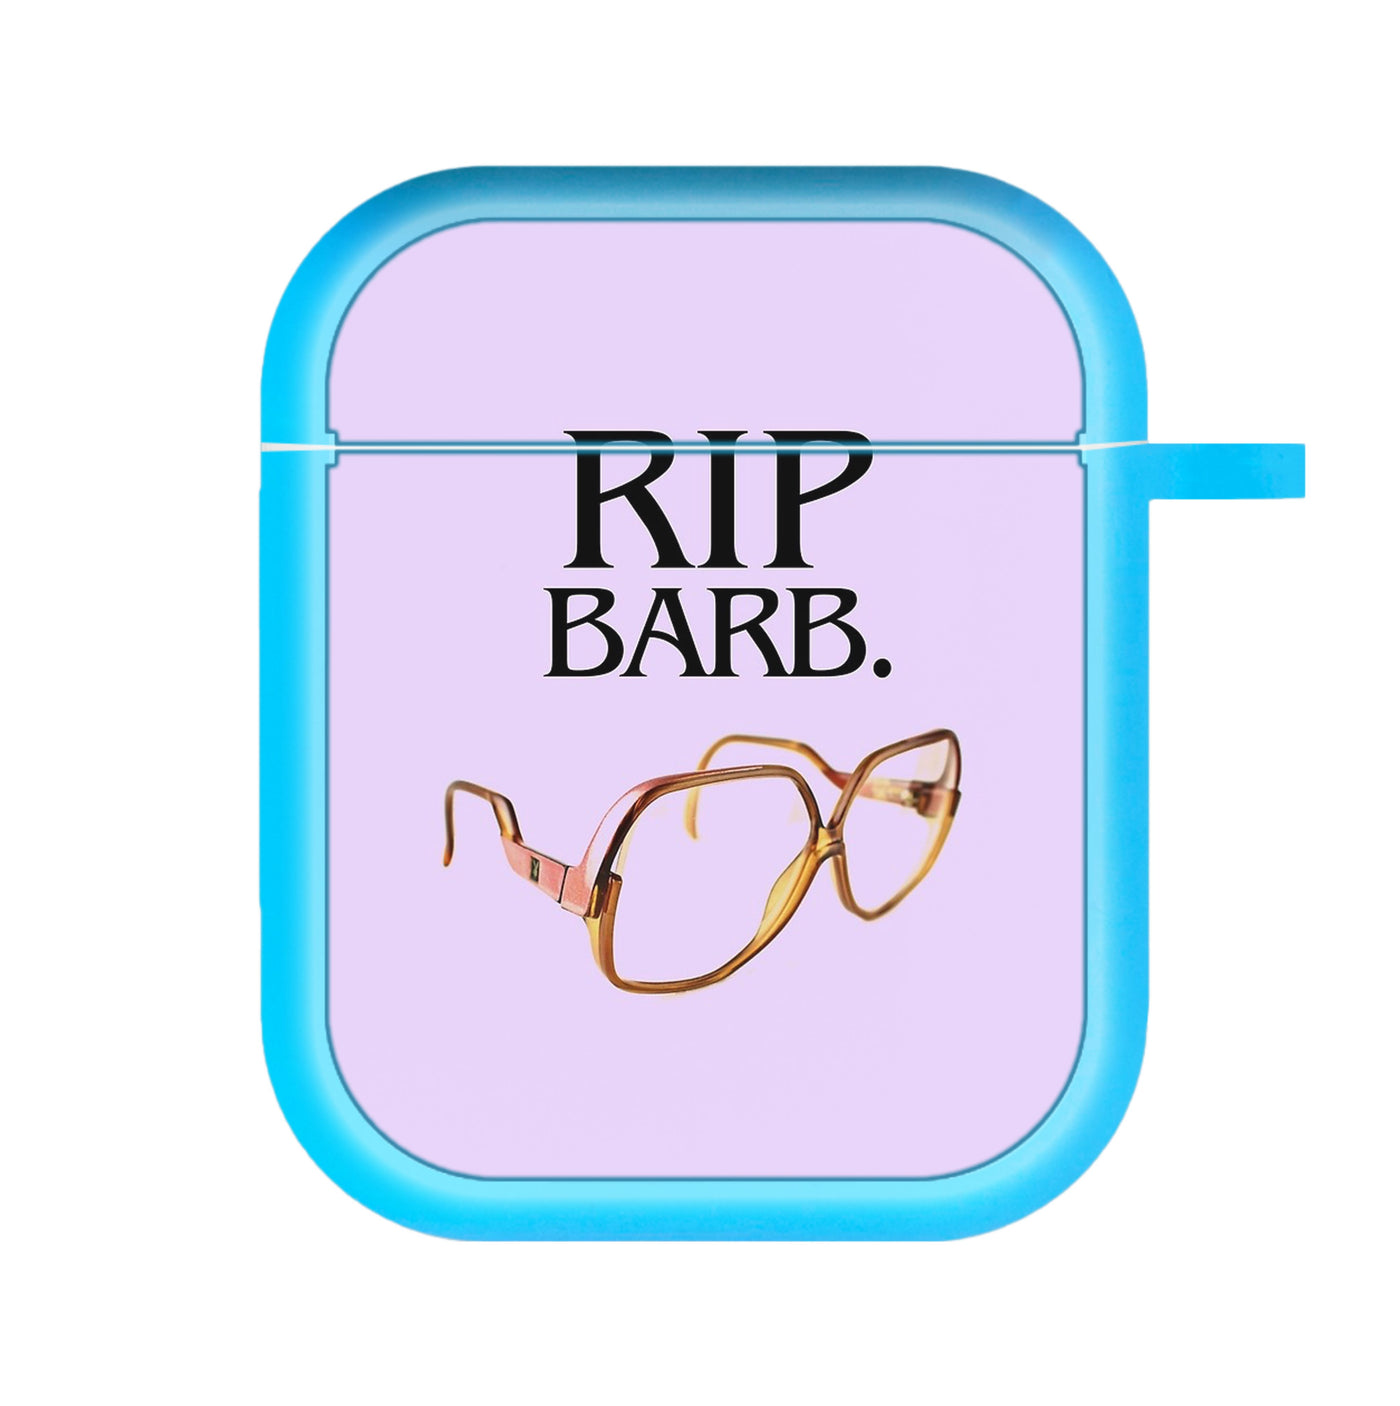 RIP Barb - Stranger Things AirPods Case